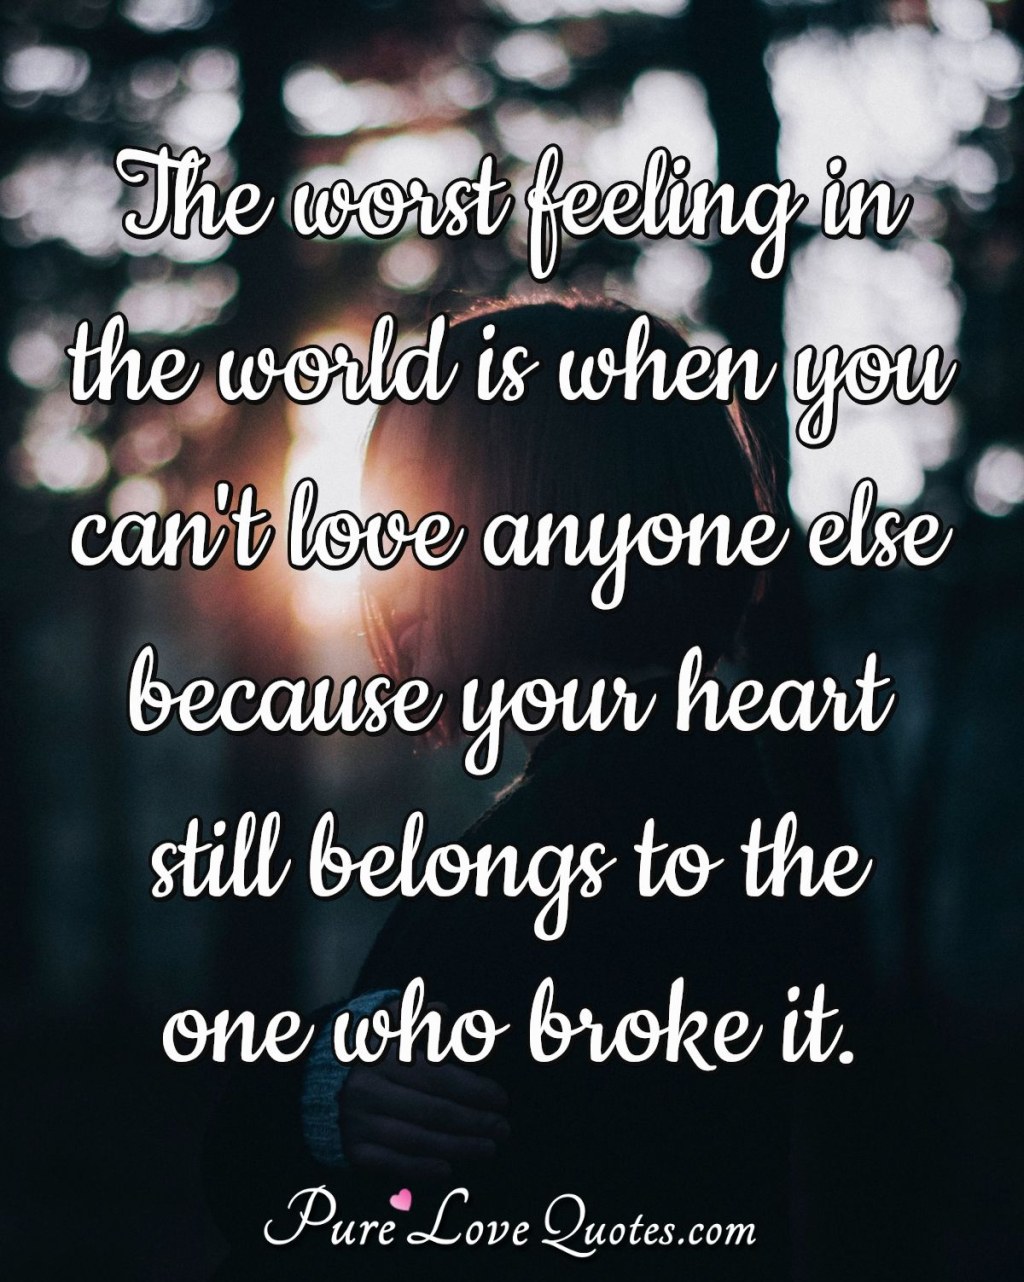 Picture of: The worst feeling in the world is when you can’t love anyone else